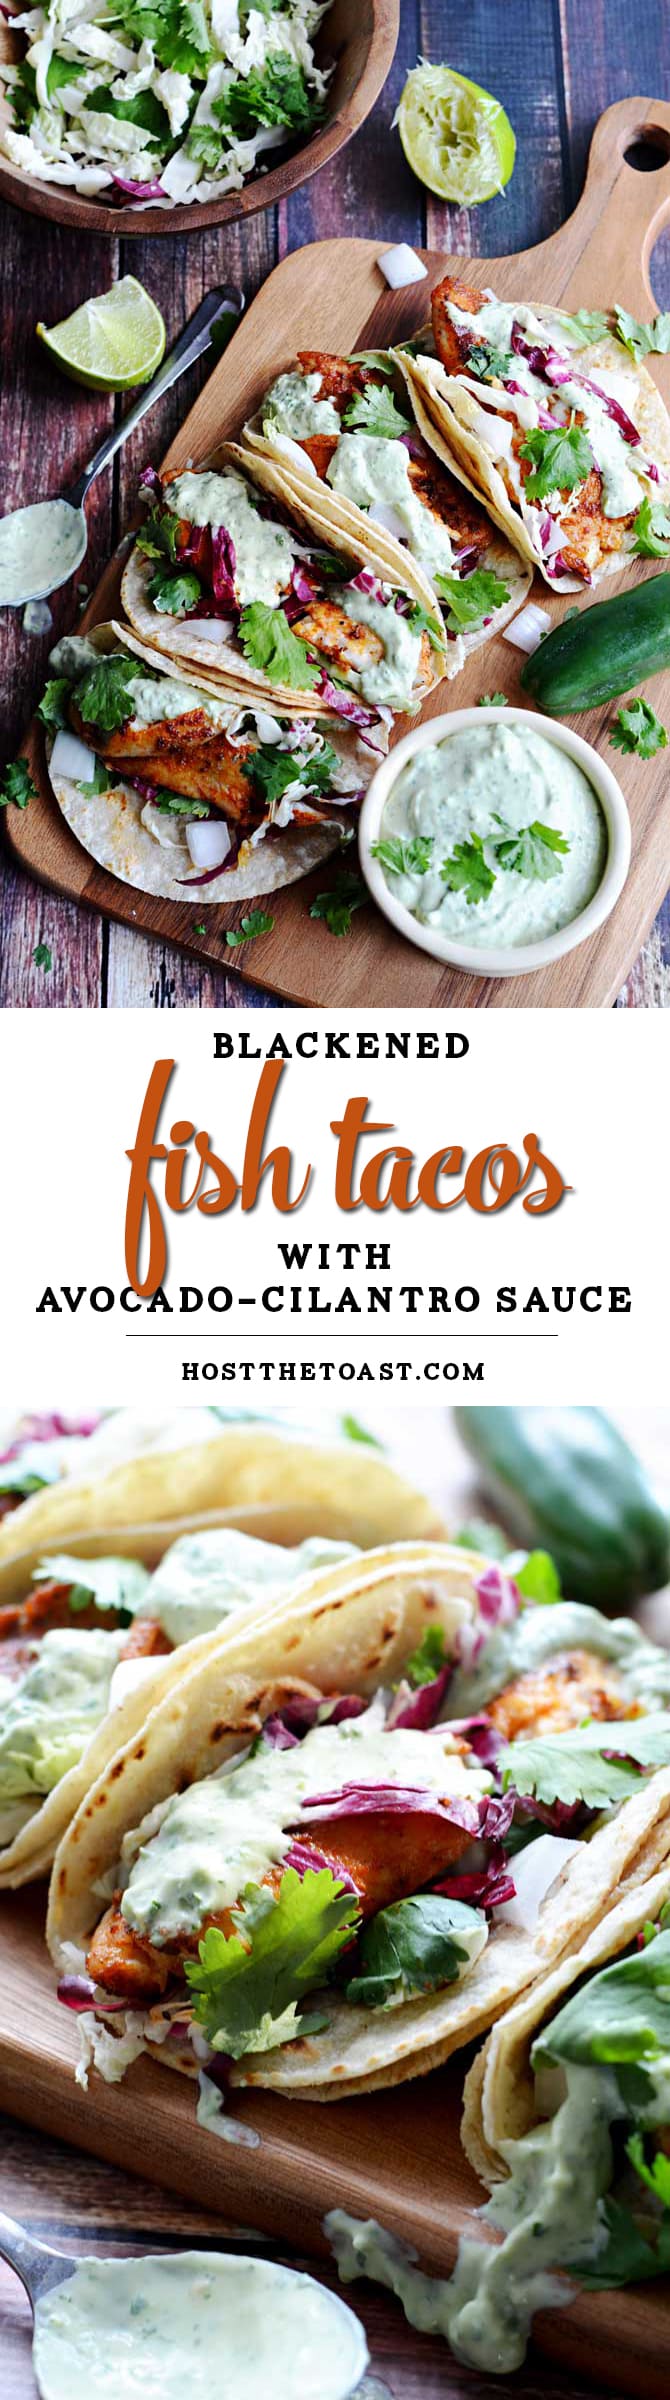 Blackened #Fish #Tacos with Avocado-Cilantro Sauce. These were some of the BEST tacos I've ever had! This recipe uses tilapia, but you can also try it with salmon, catfish, or whatever your heart desires! You can't go wrong with this #recipe. | hostthetoast.com